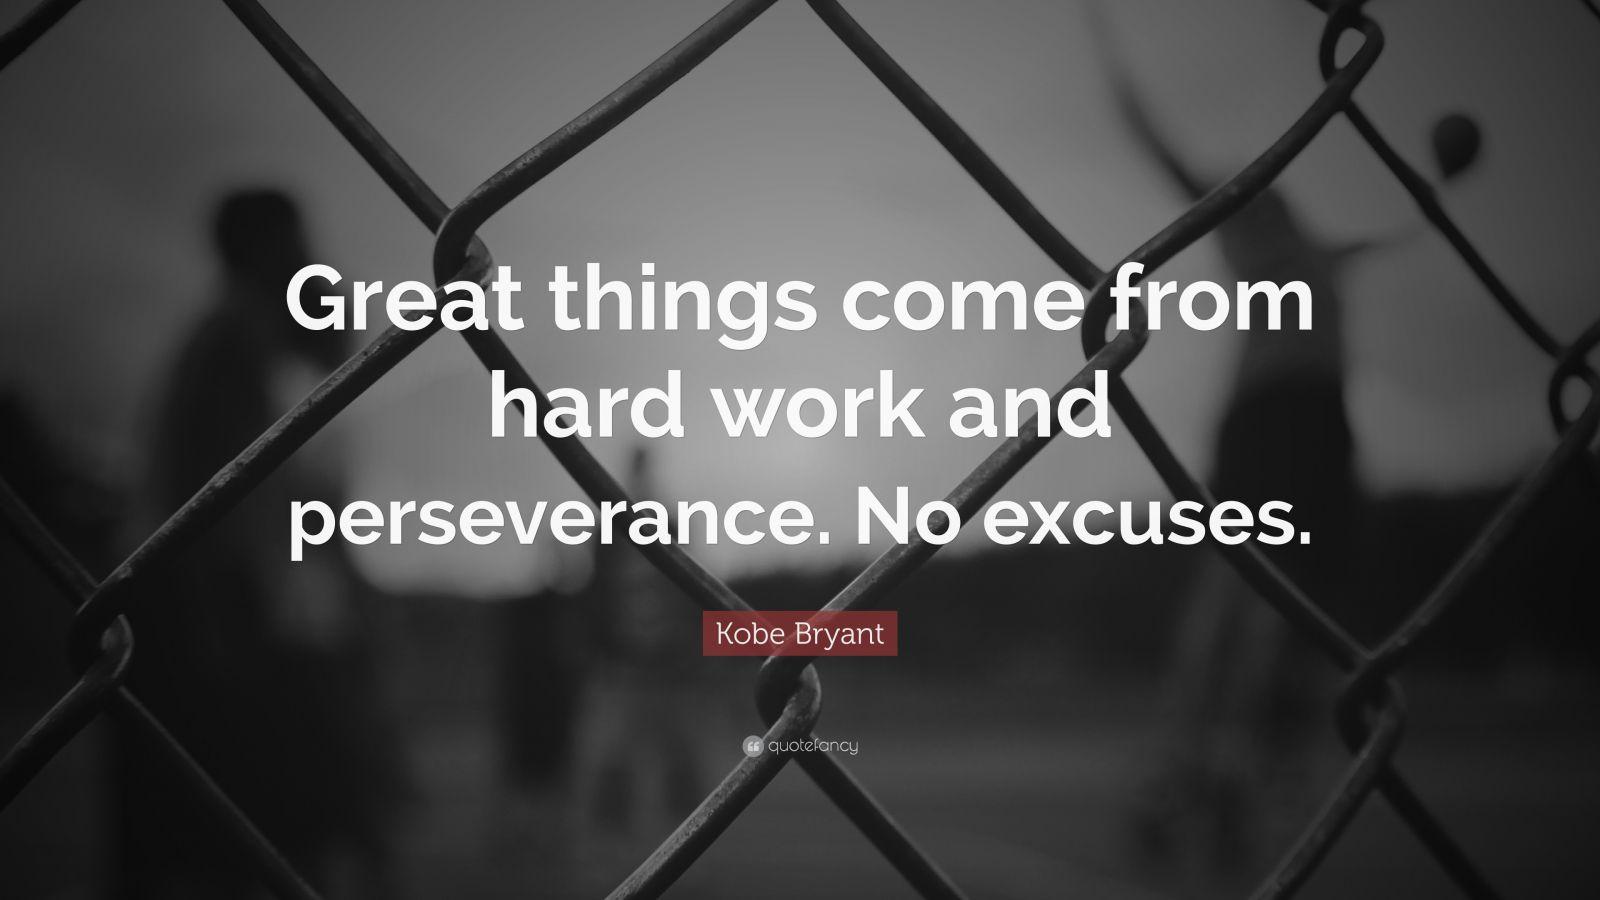 Kobe Bryant Quote: “Great things come from hard work and perseverance. No excuses.” (22 wallpaper)